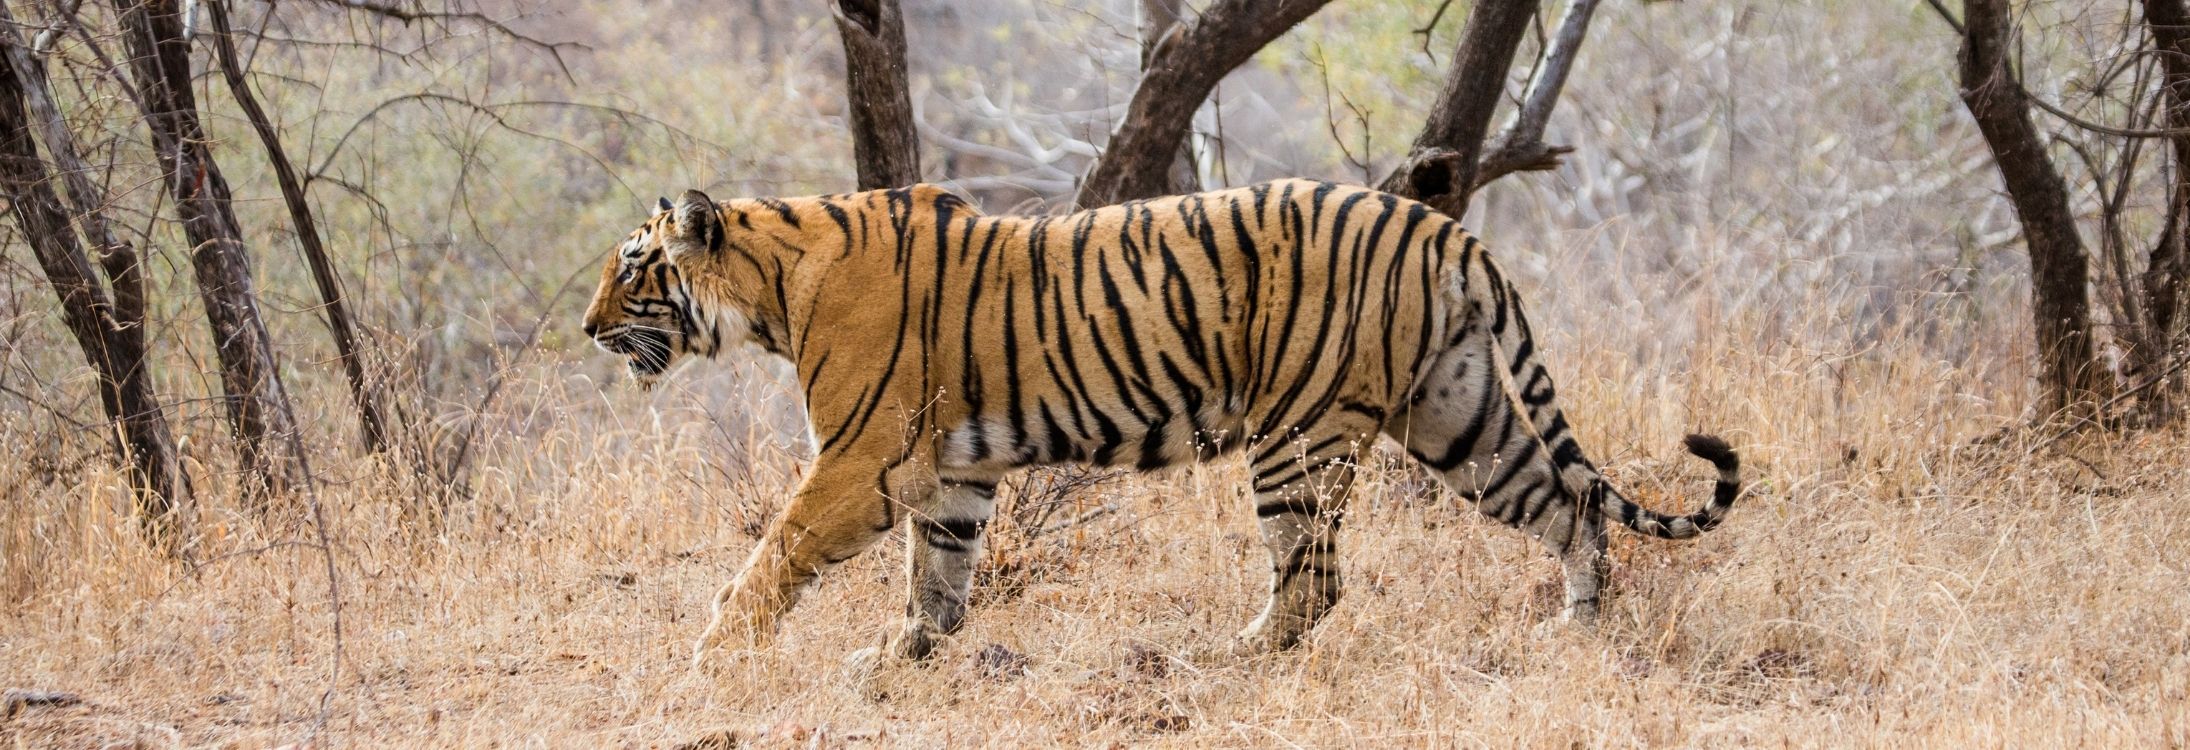 5 Tiger Reserves That You Need to Visit